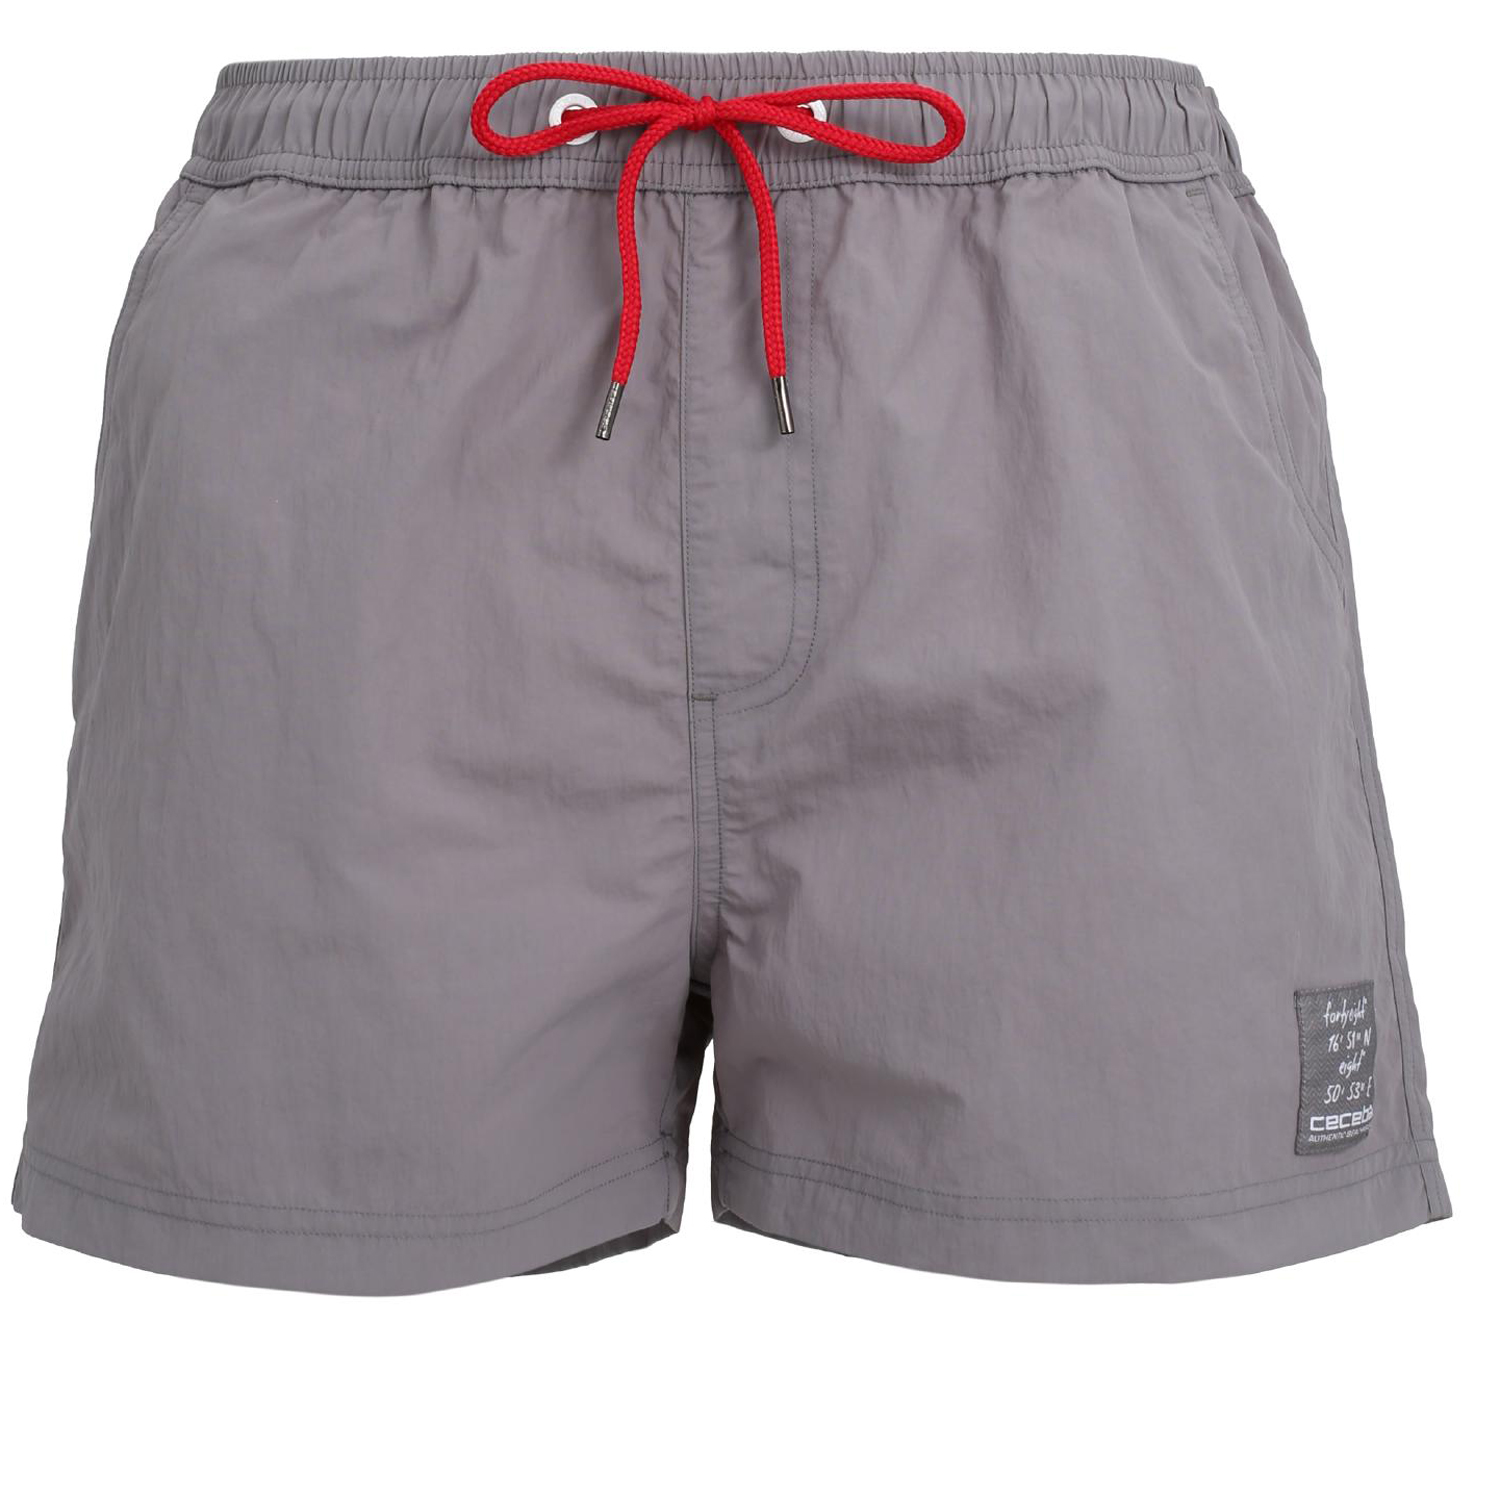 Swimming trunks in grey by Ceceba in oversizes up to 7XL